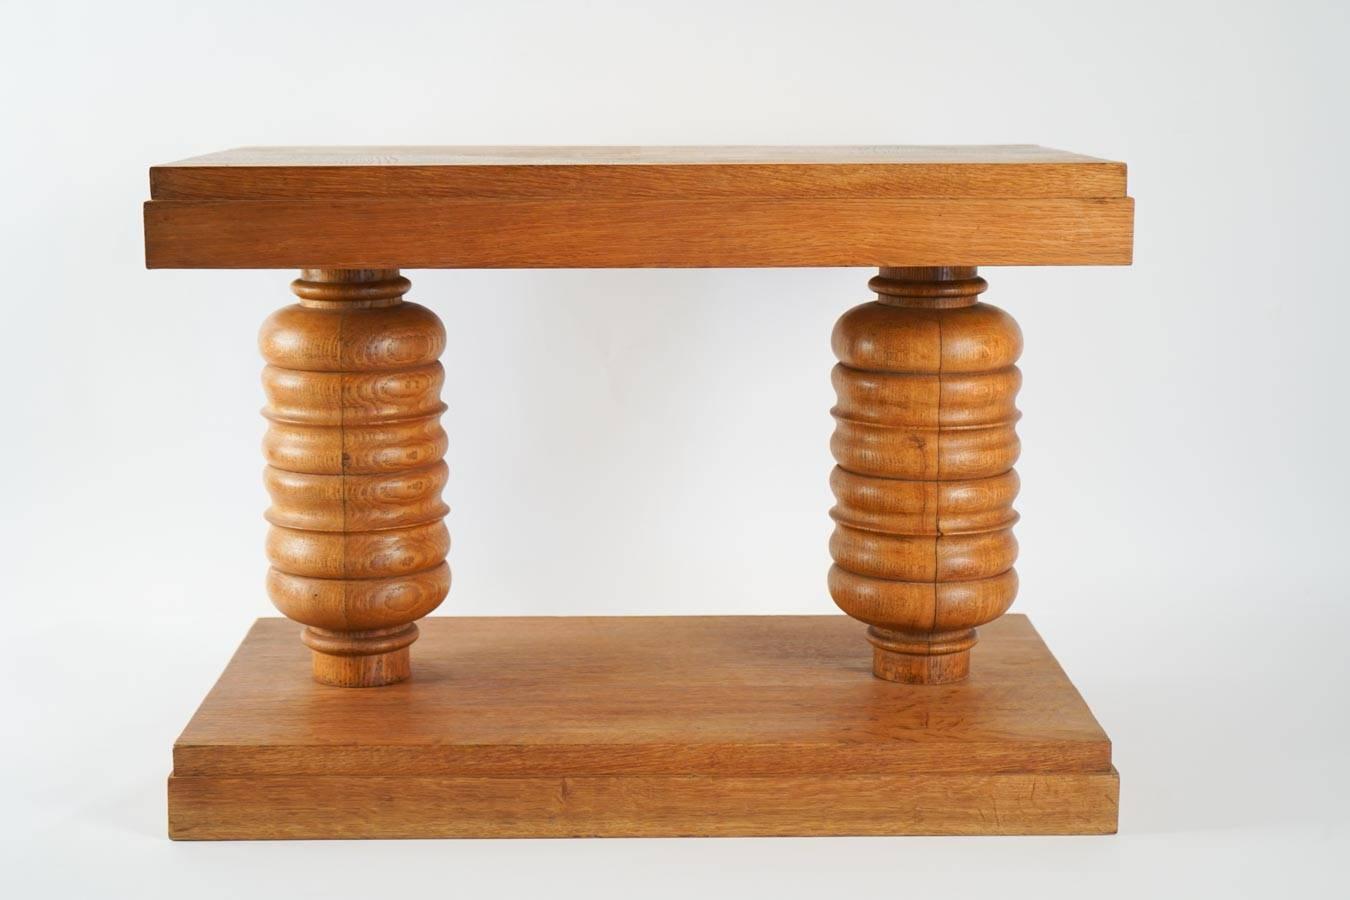 Side table in oak by Charles Dudouyt (French 1885-1946).
Measures: H 50cm, L 70cm, P 40cm.